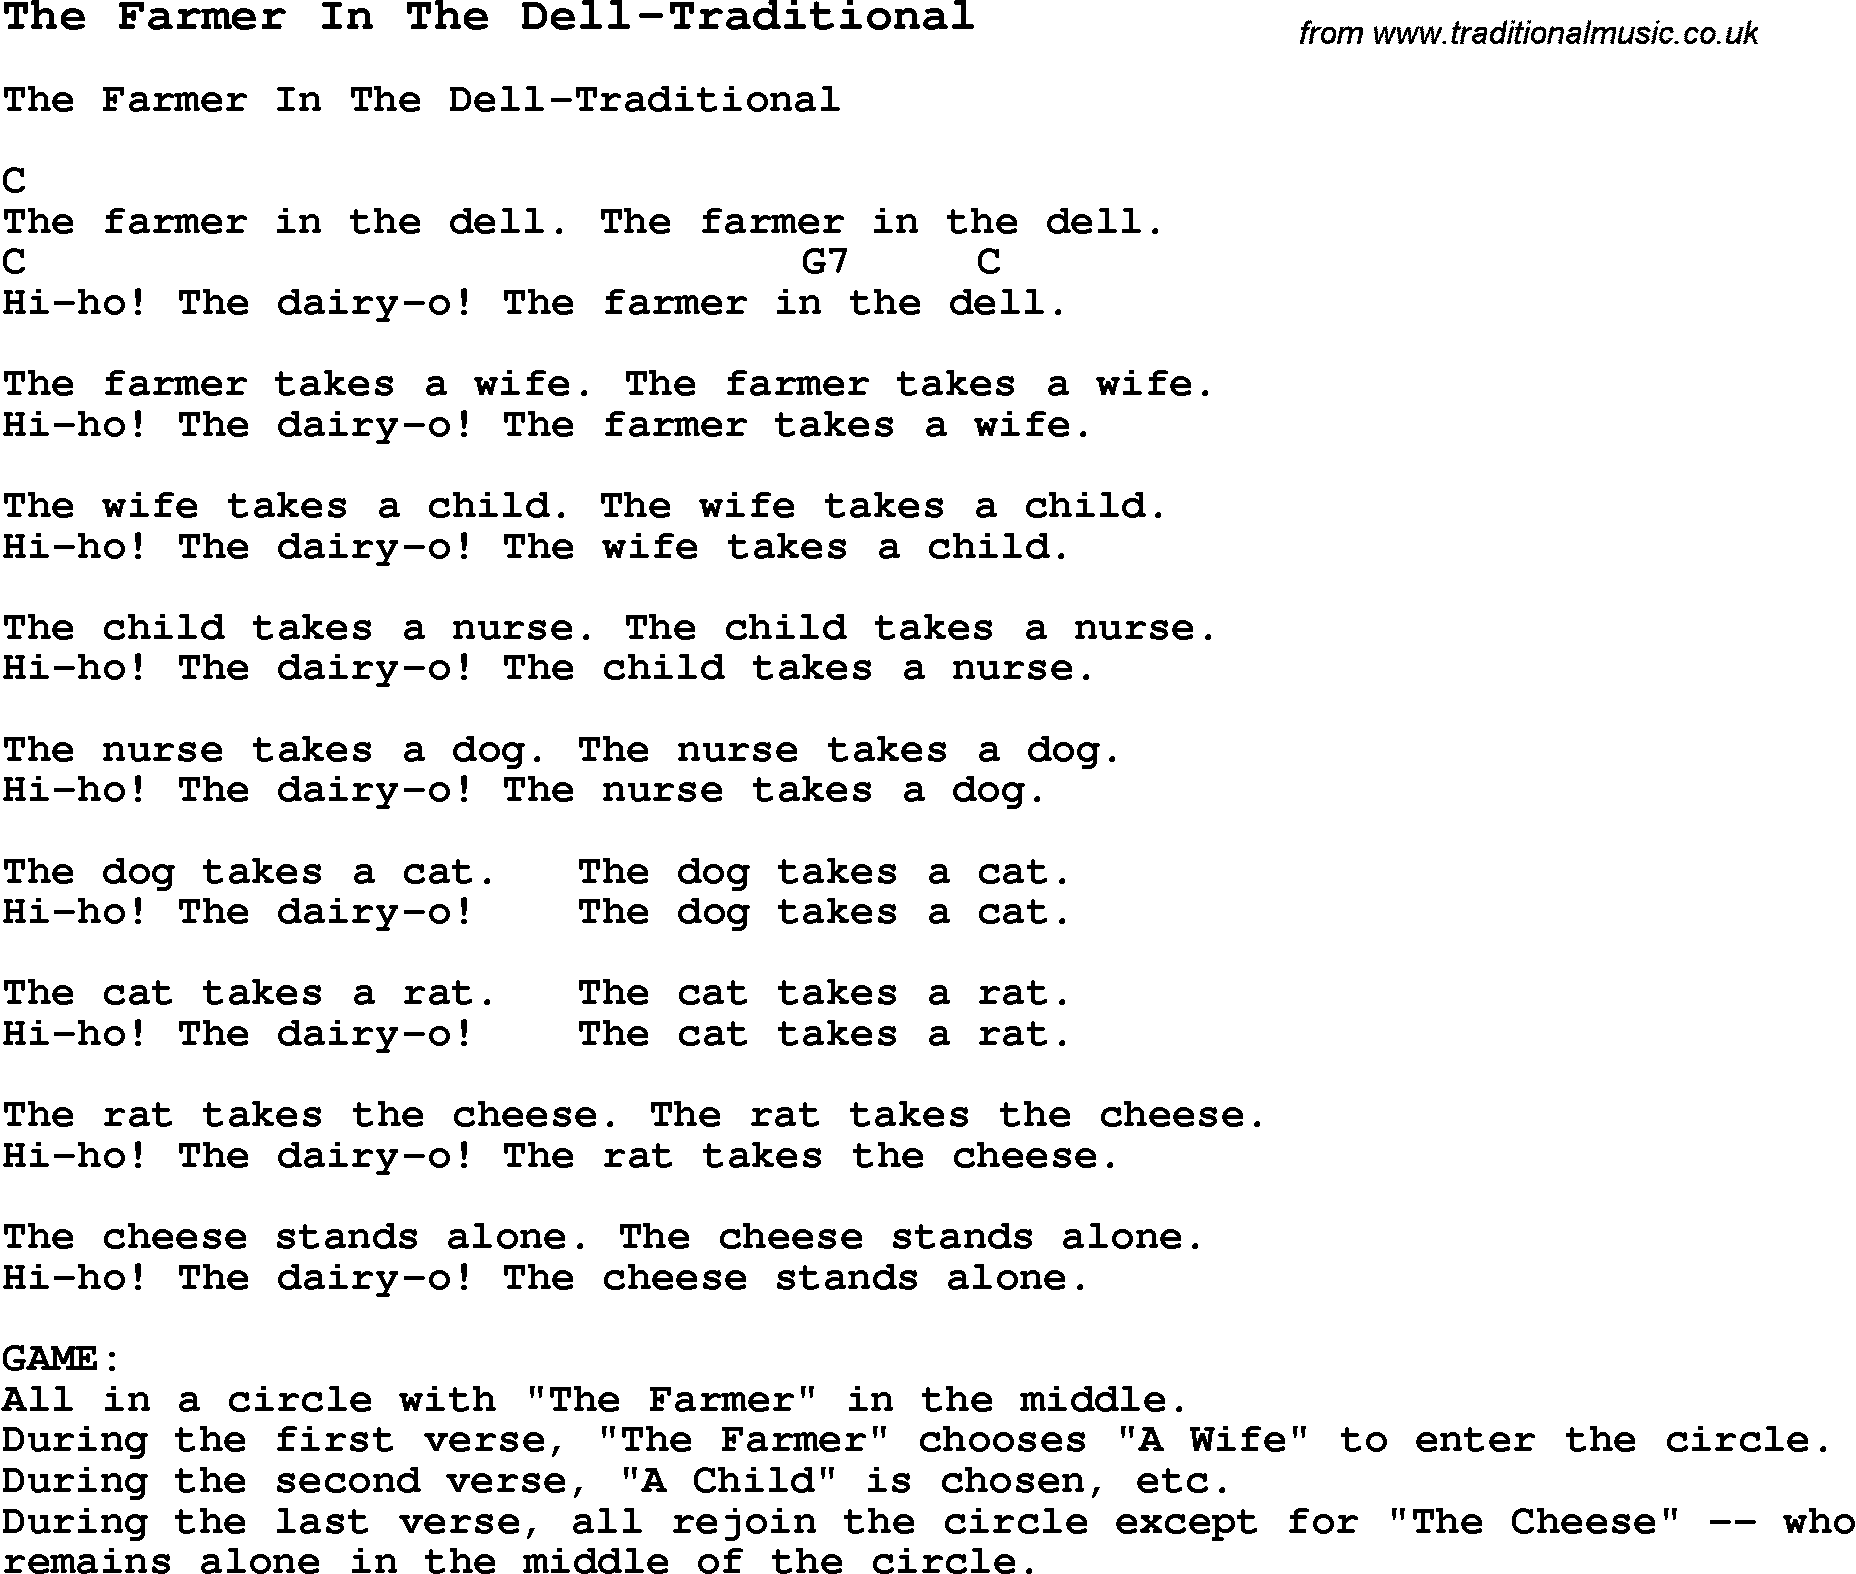 Summer-Camp Song, The Farmer In The Dell-Traditional, with lyrics and chords for Ukulele, Guitar Banjo etc.